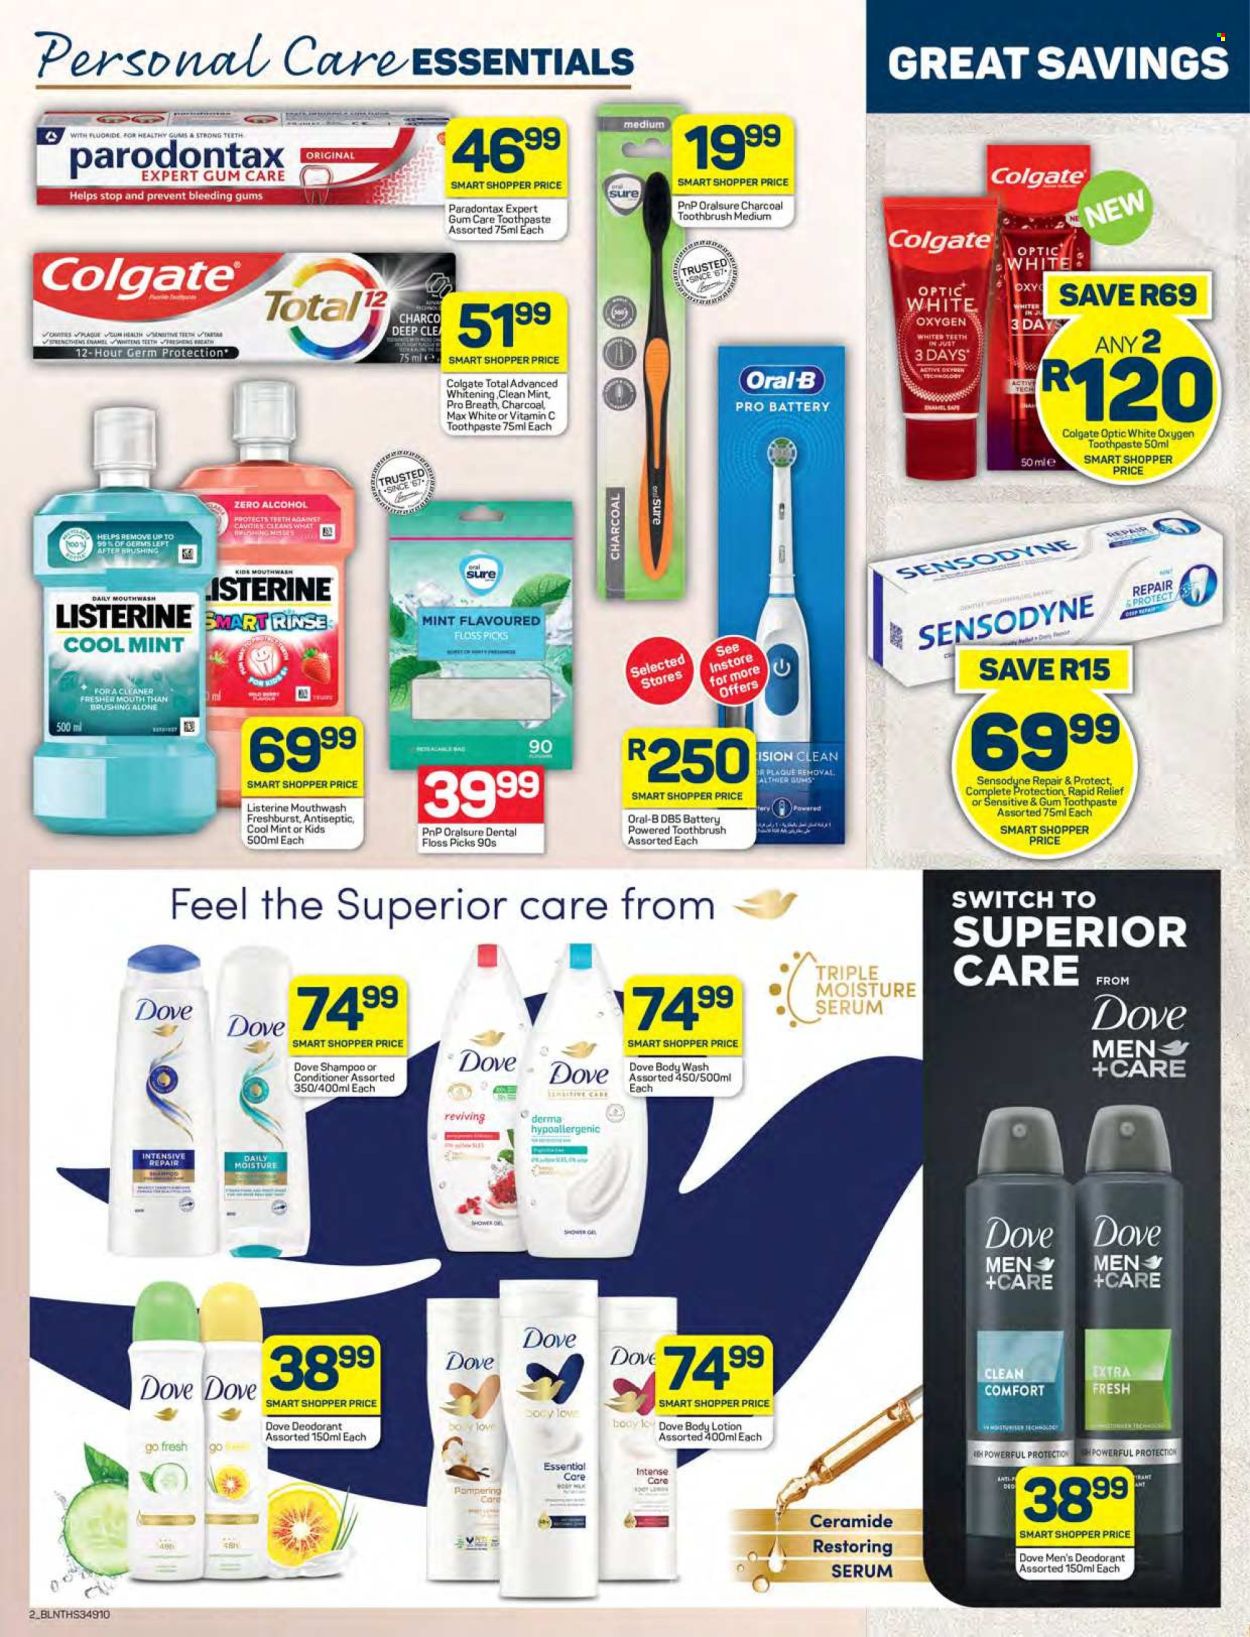 Pick n Pay specials - 03.25.2024 - 04.05.2024. 